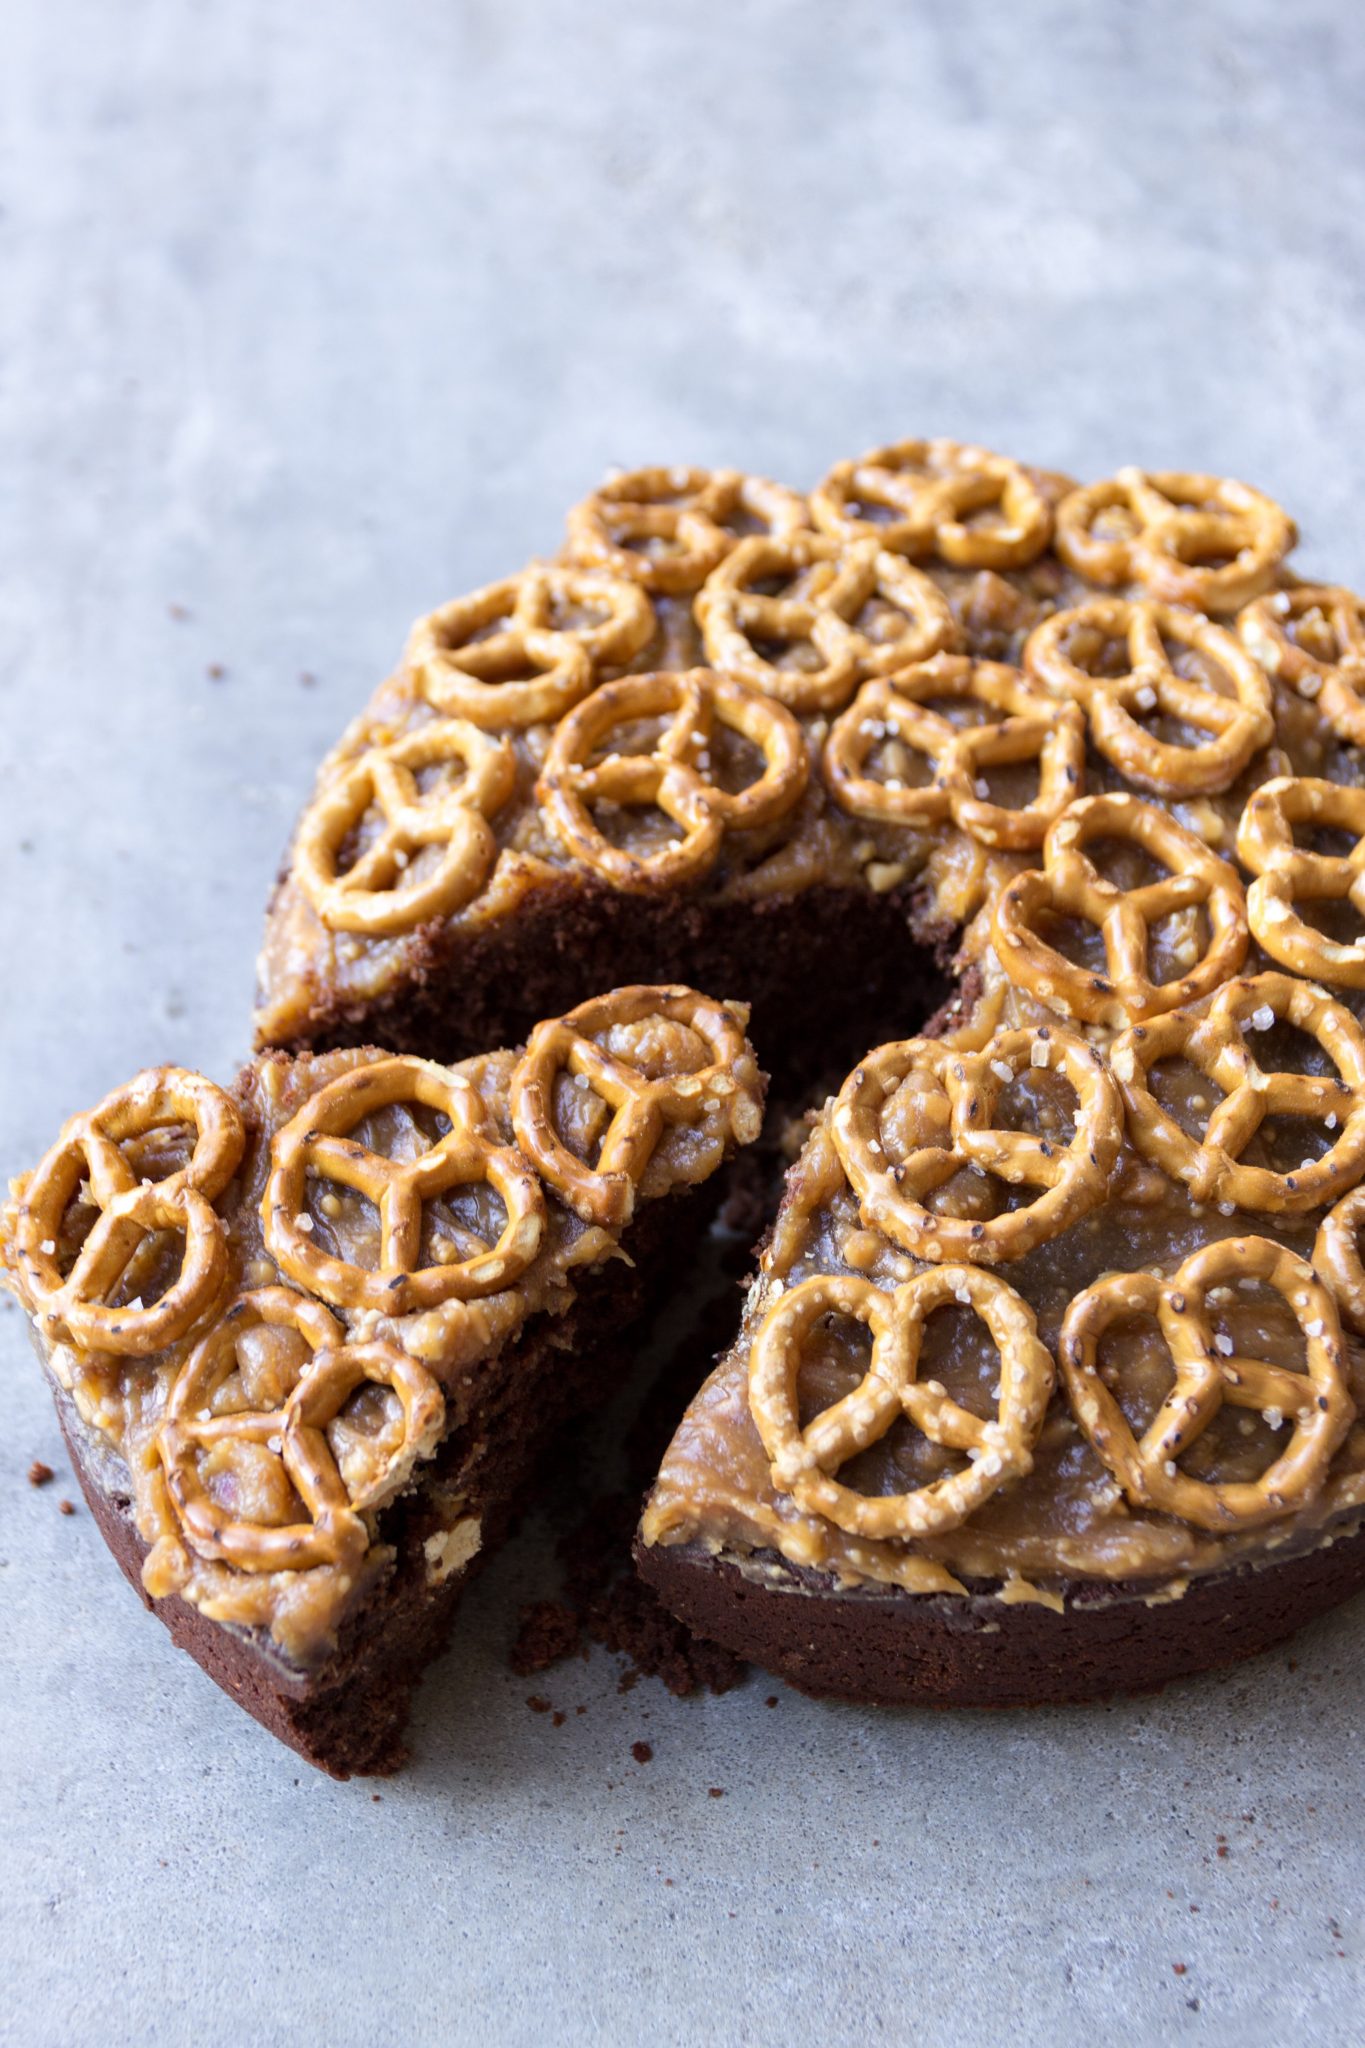 Vegan Chocolate Cake with Peanut Butter Icing and Salted Pretzels.